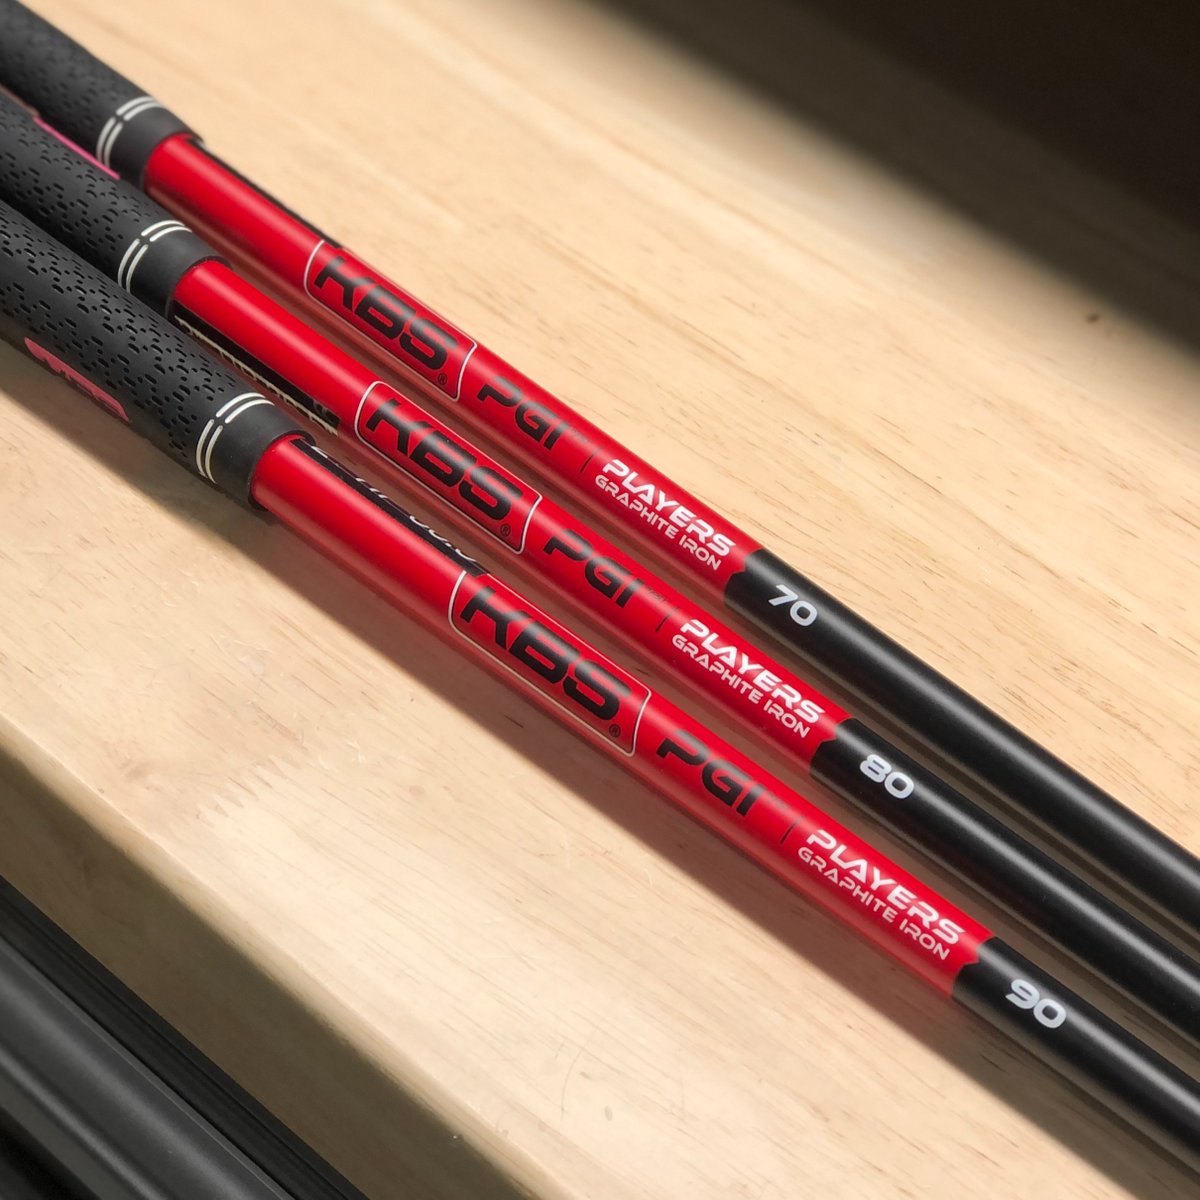 The Players Graphite Iron (PGI) continues to make waves on the LPGA Tour, winning the Women's PGA Championship. This shaft provides control, tight dispersion and consistency in a lighter weight performance shaft. Grab yours now at https://t.co/DuOv7uiNd5 #playtheredlabel https://t.co/0rP9zlUWc9